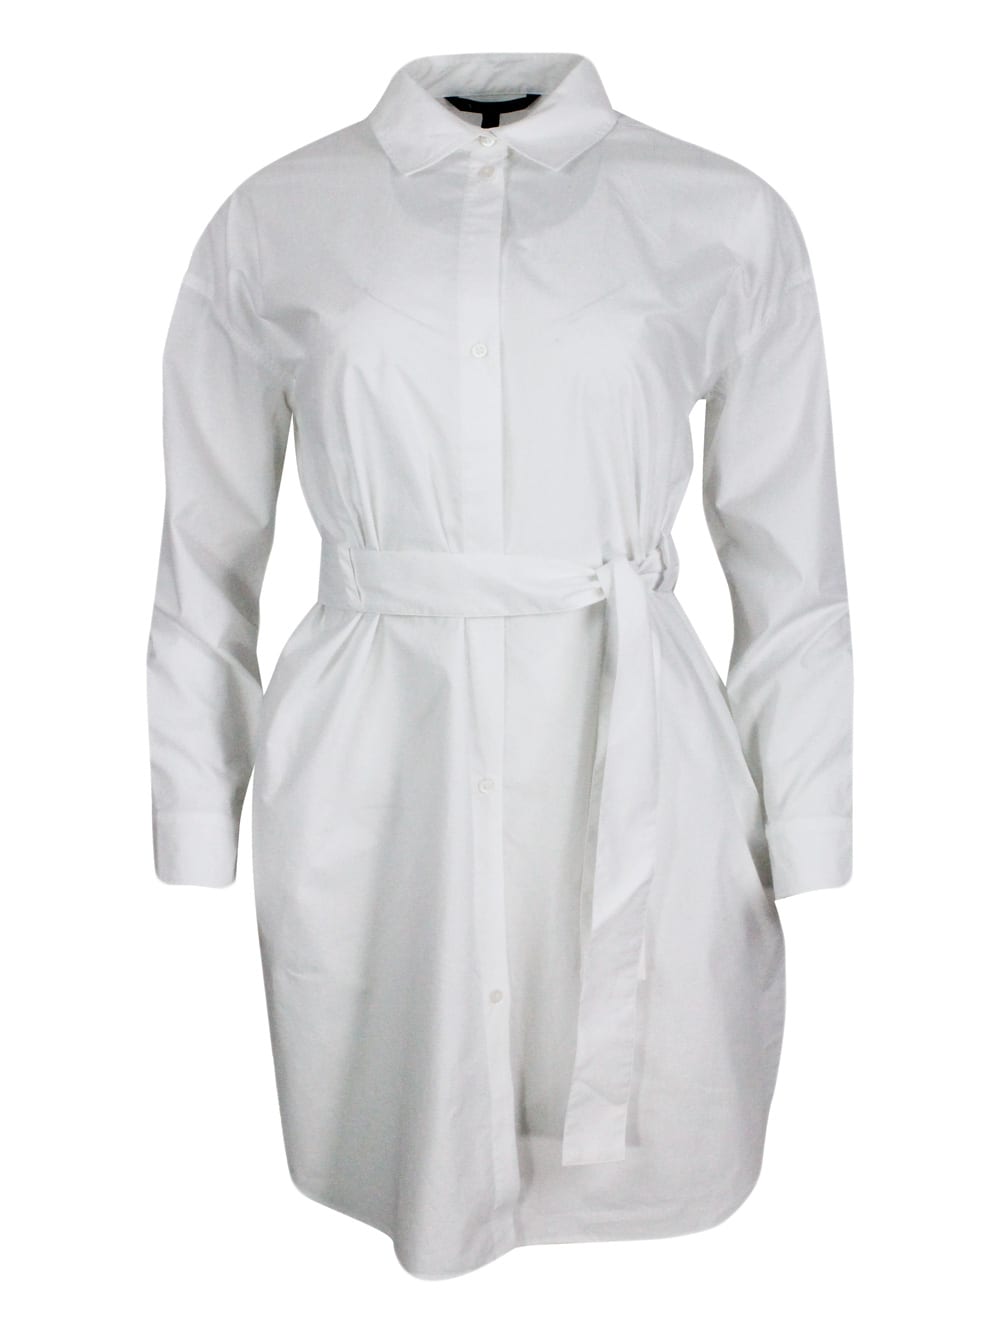 Dress Made Of Soft Cotton With Long Sleeves, With Button Closure On The Front And Belt.